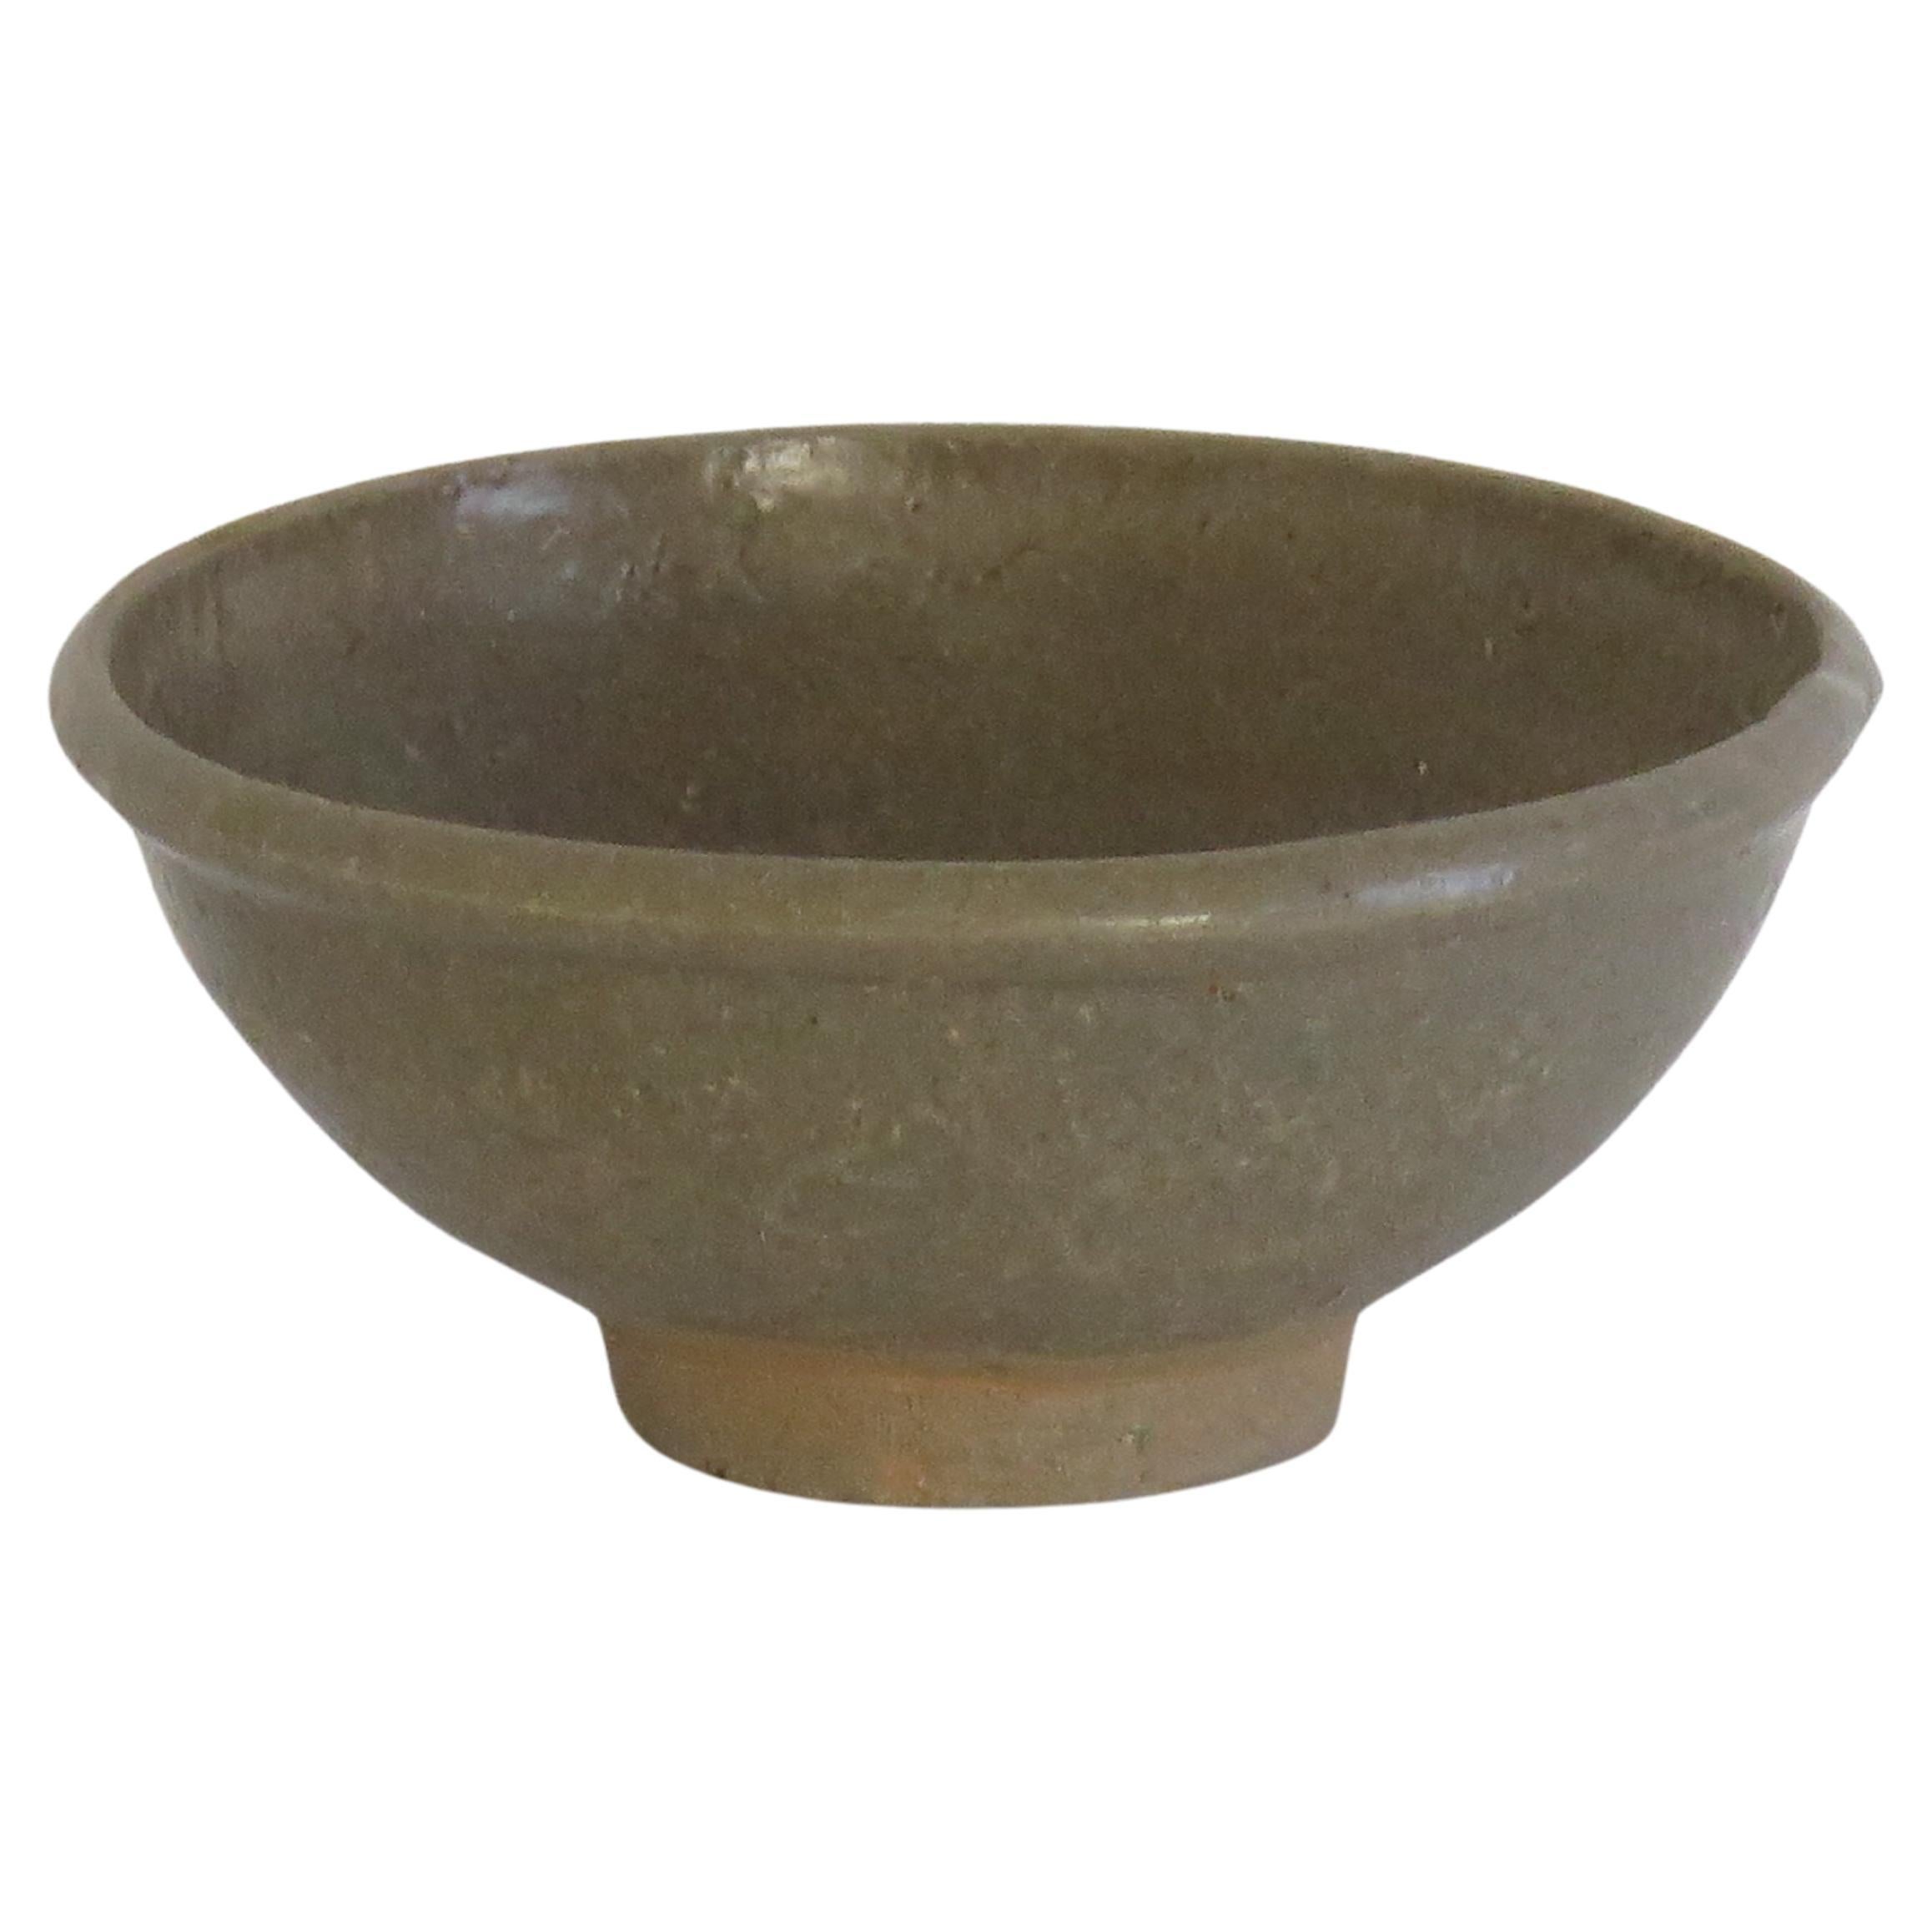 Chinese Export Stoneware Bowl Longquan Celadon, Early Ming Dynasty Circa 1400 For Sale